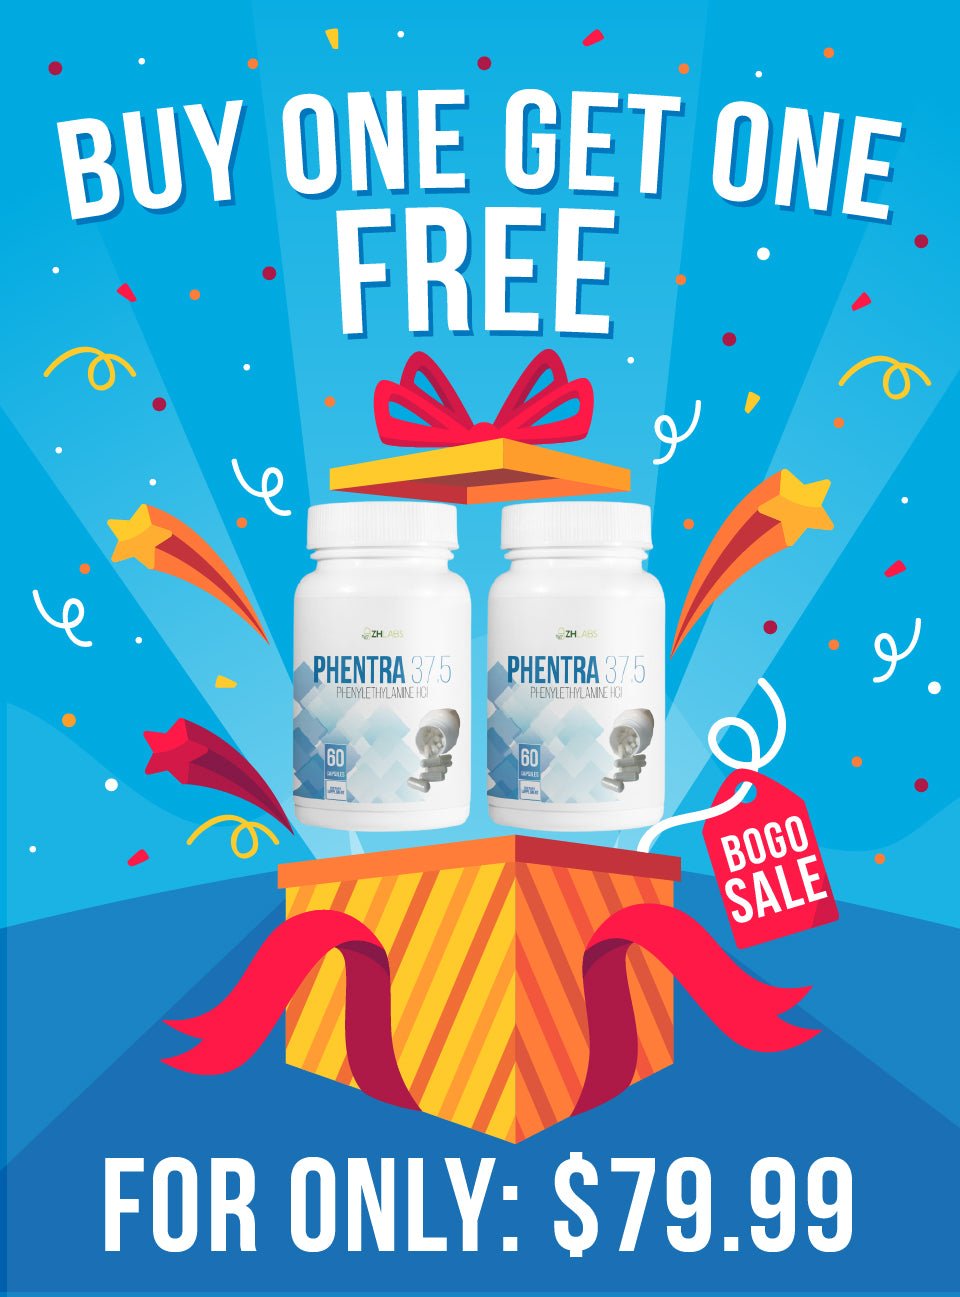 LAUNCH OFFER! BUY ONE! GET ONE FREE!! Phentra 37.5